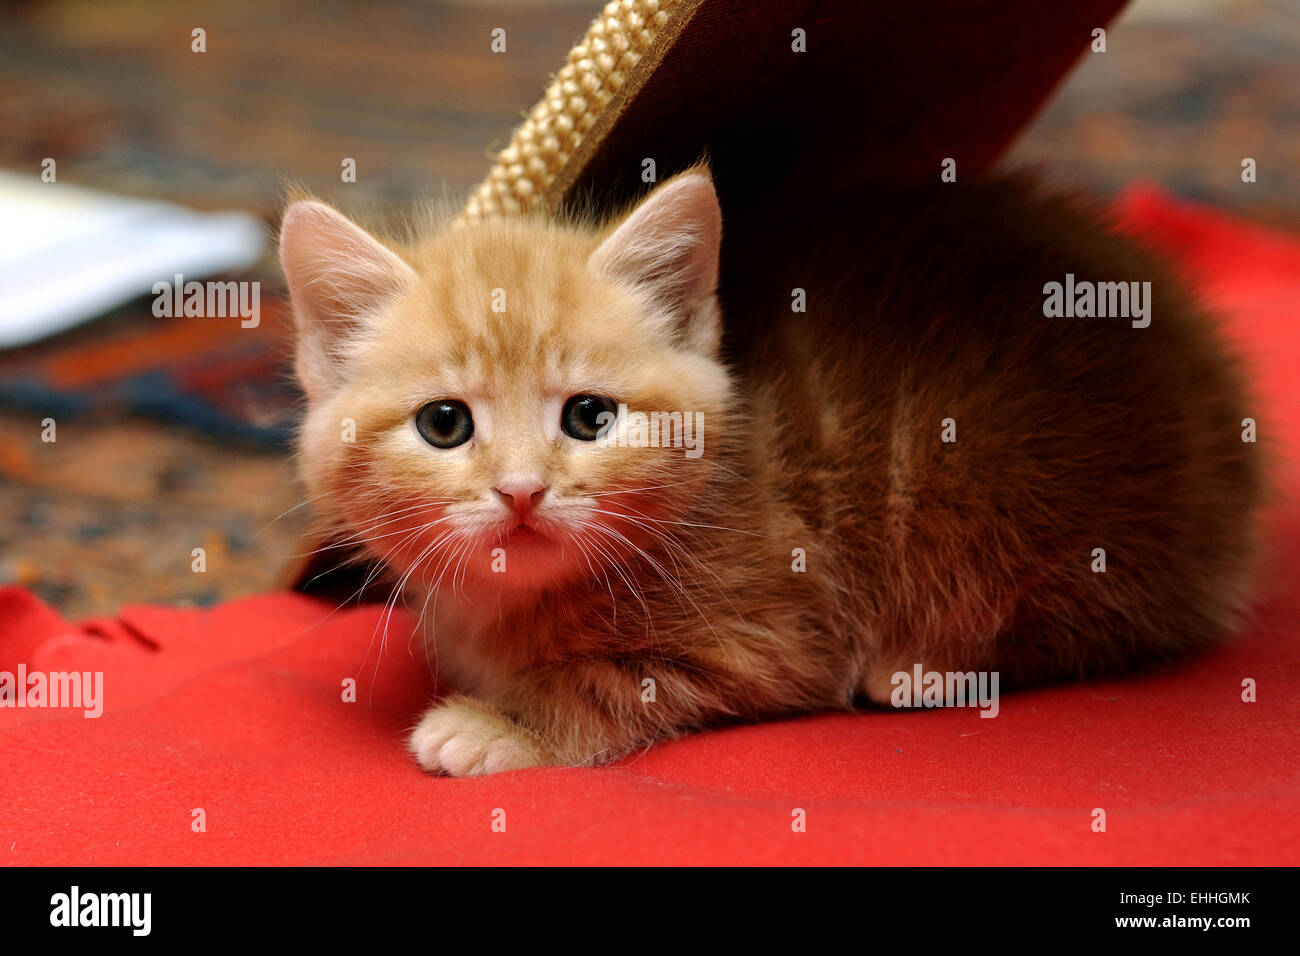 babycat lying on a red blanket Stock Photo